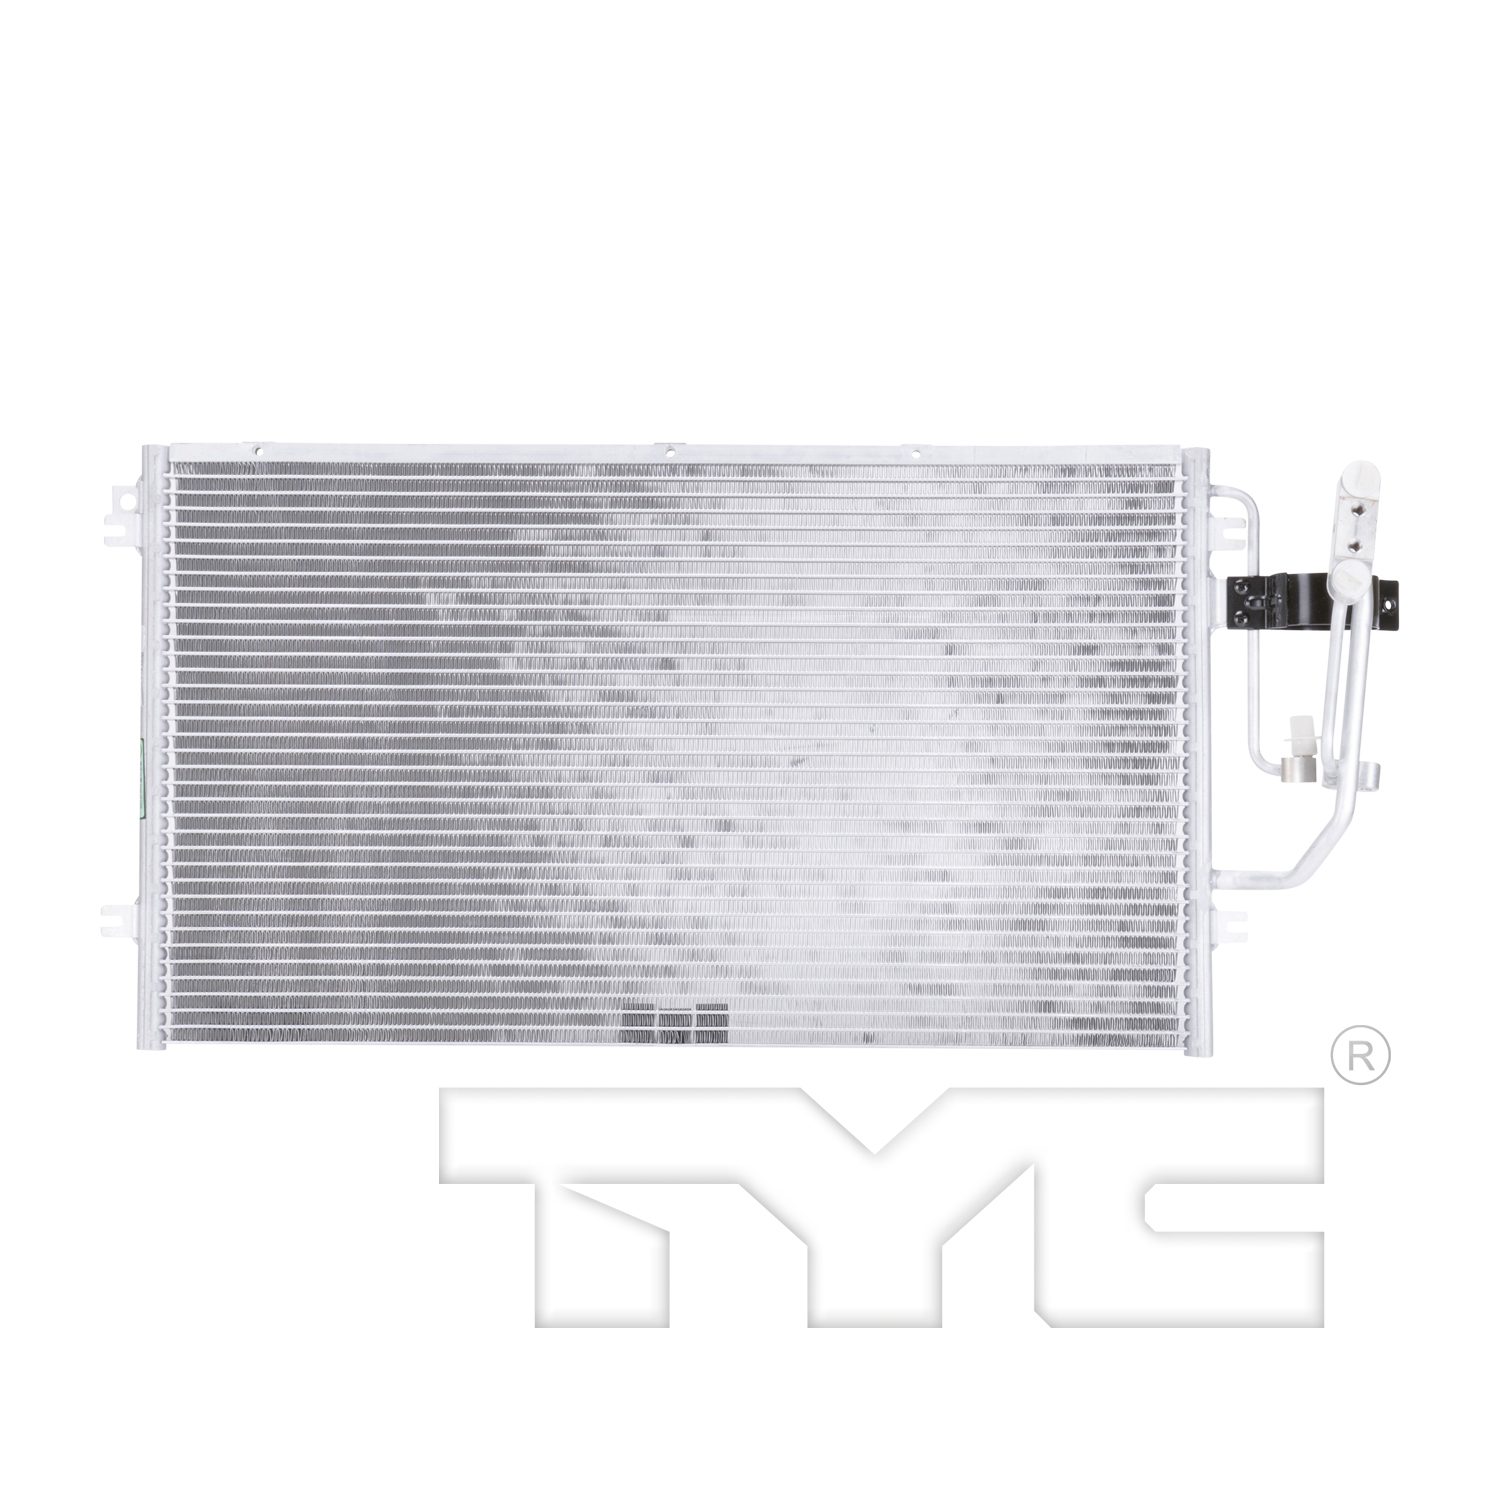 Aftermarket AC CONDENSERS for SATURN - LW2, LW2,00-00,Air conditioning condenser